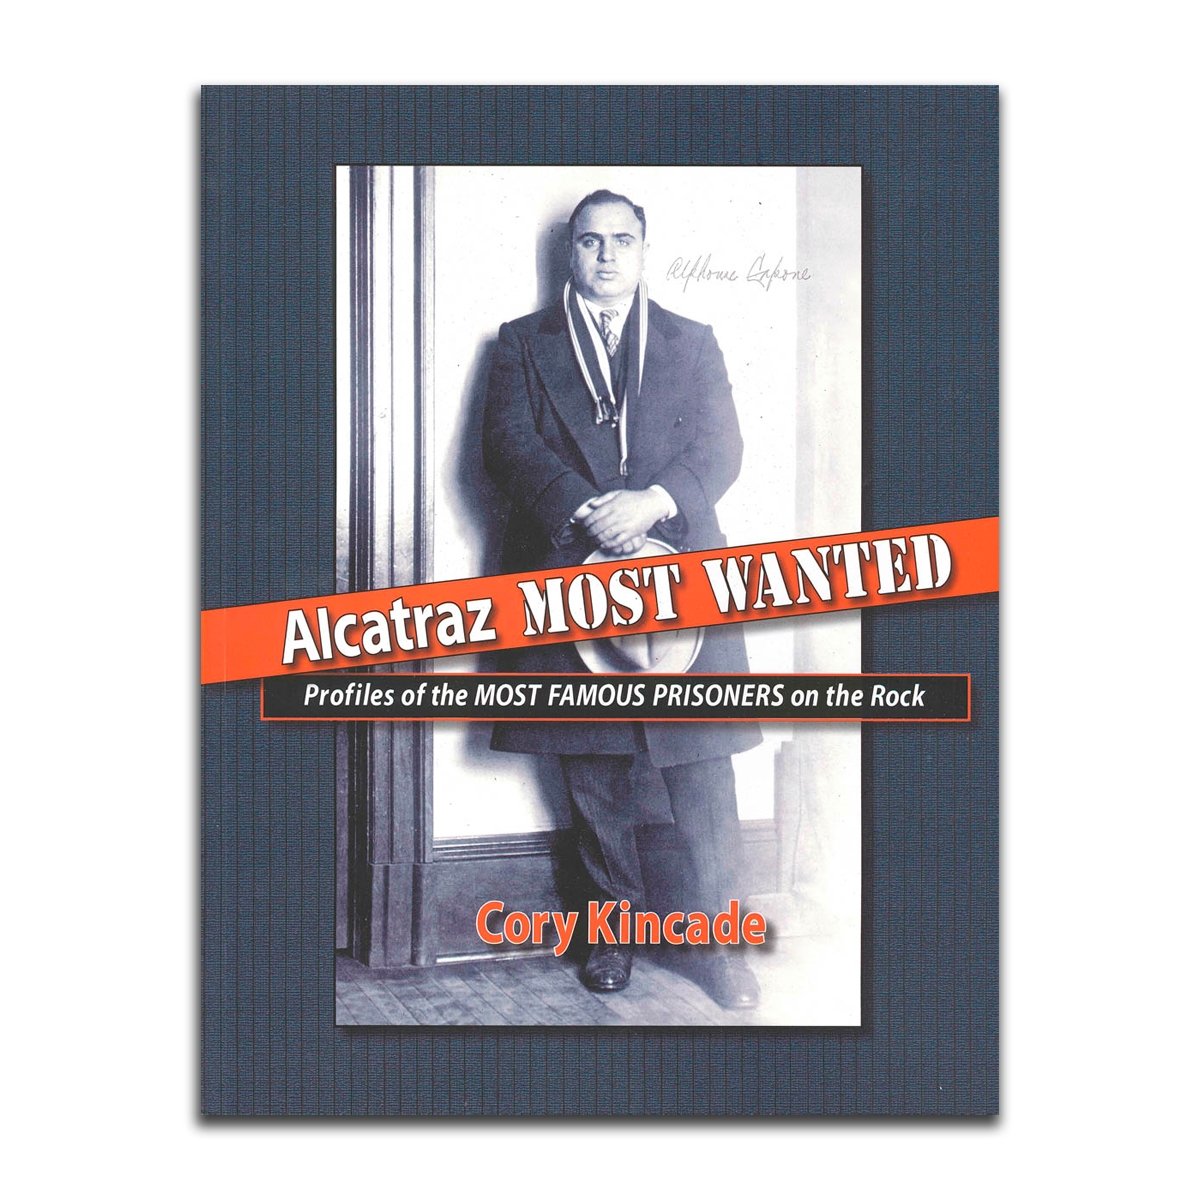 Alcatraz Most Wanted book by Cory Kincade, stories of infamous inmates from US Penitentiary Alcatraz.